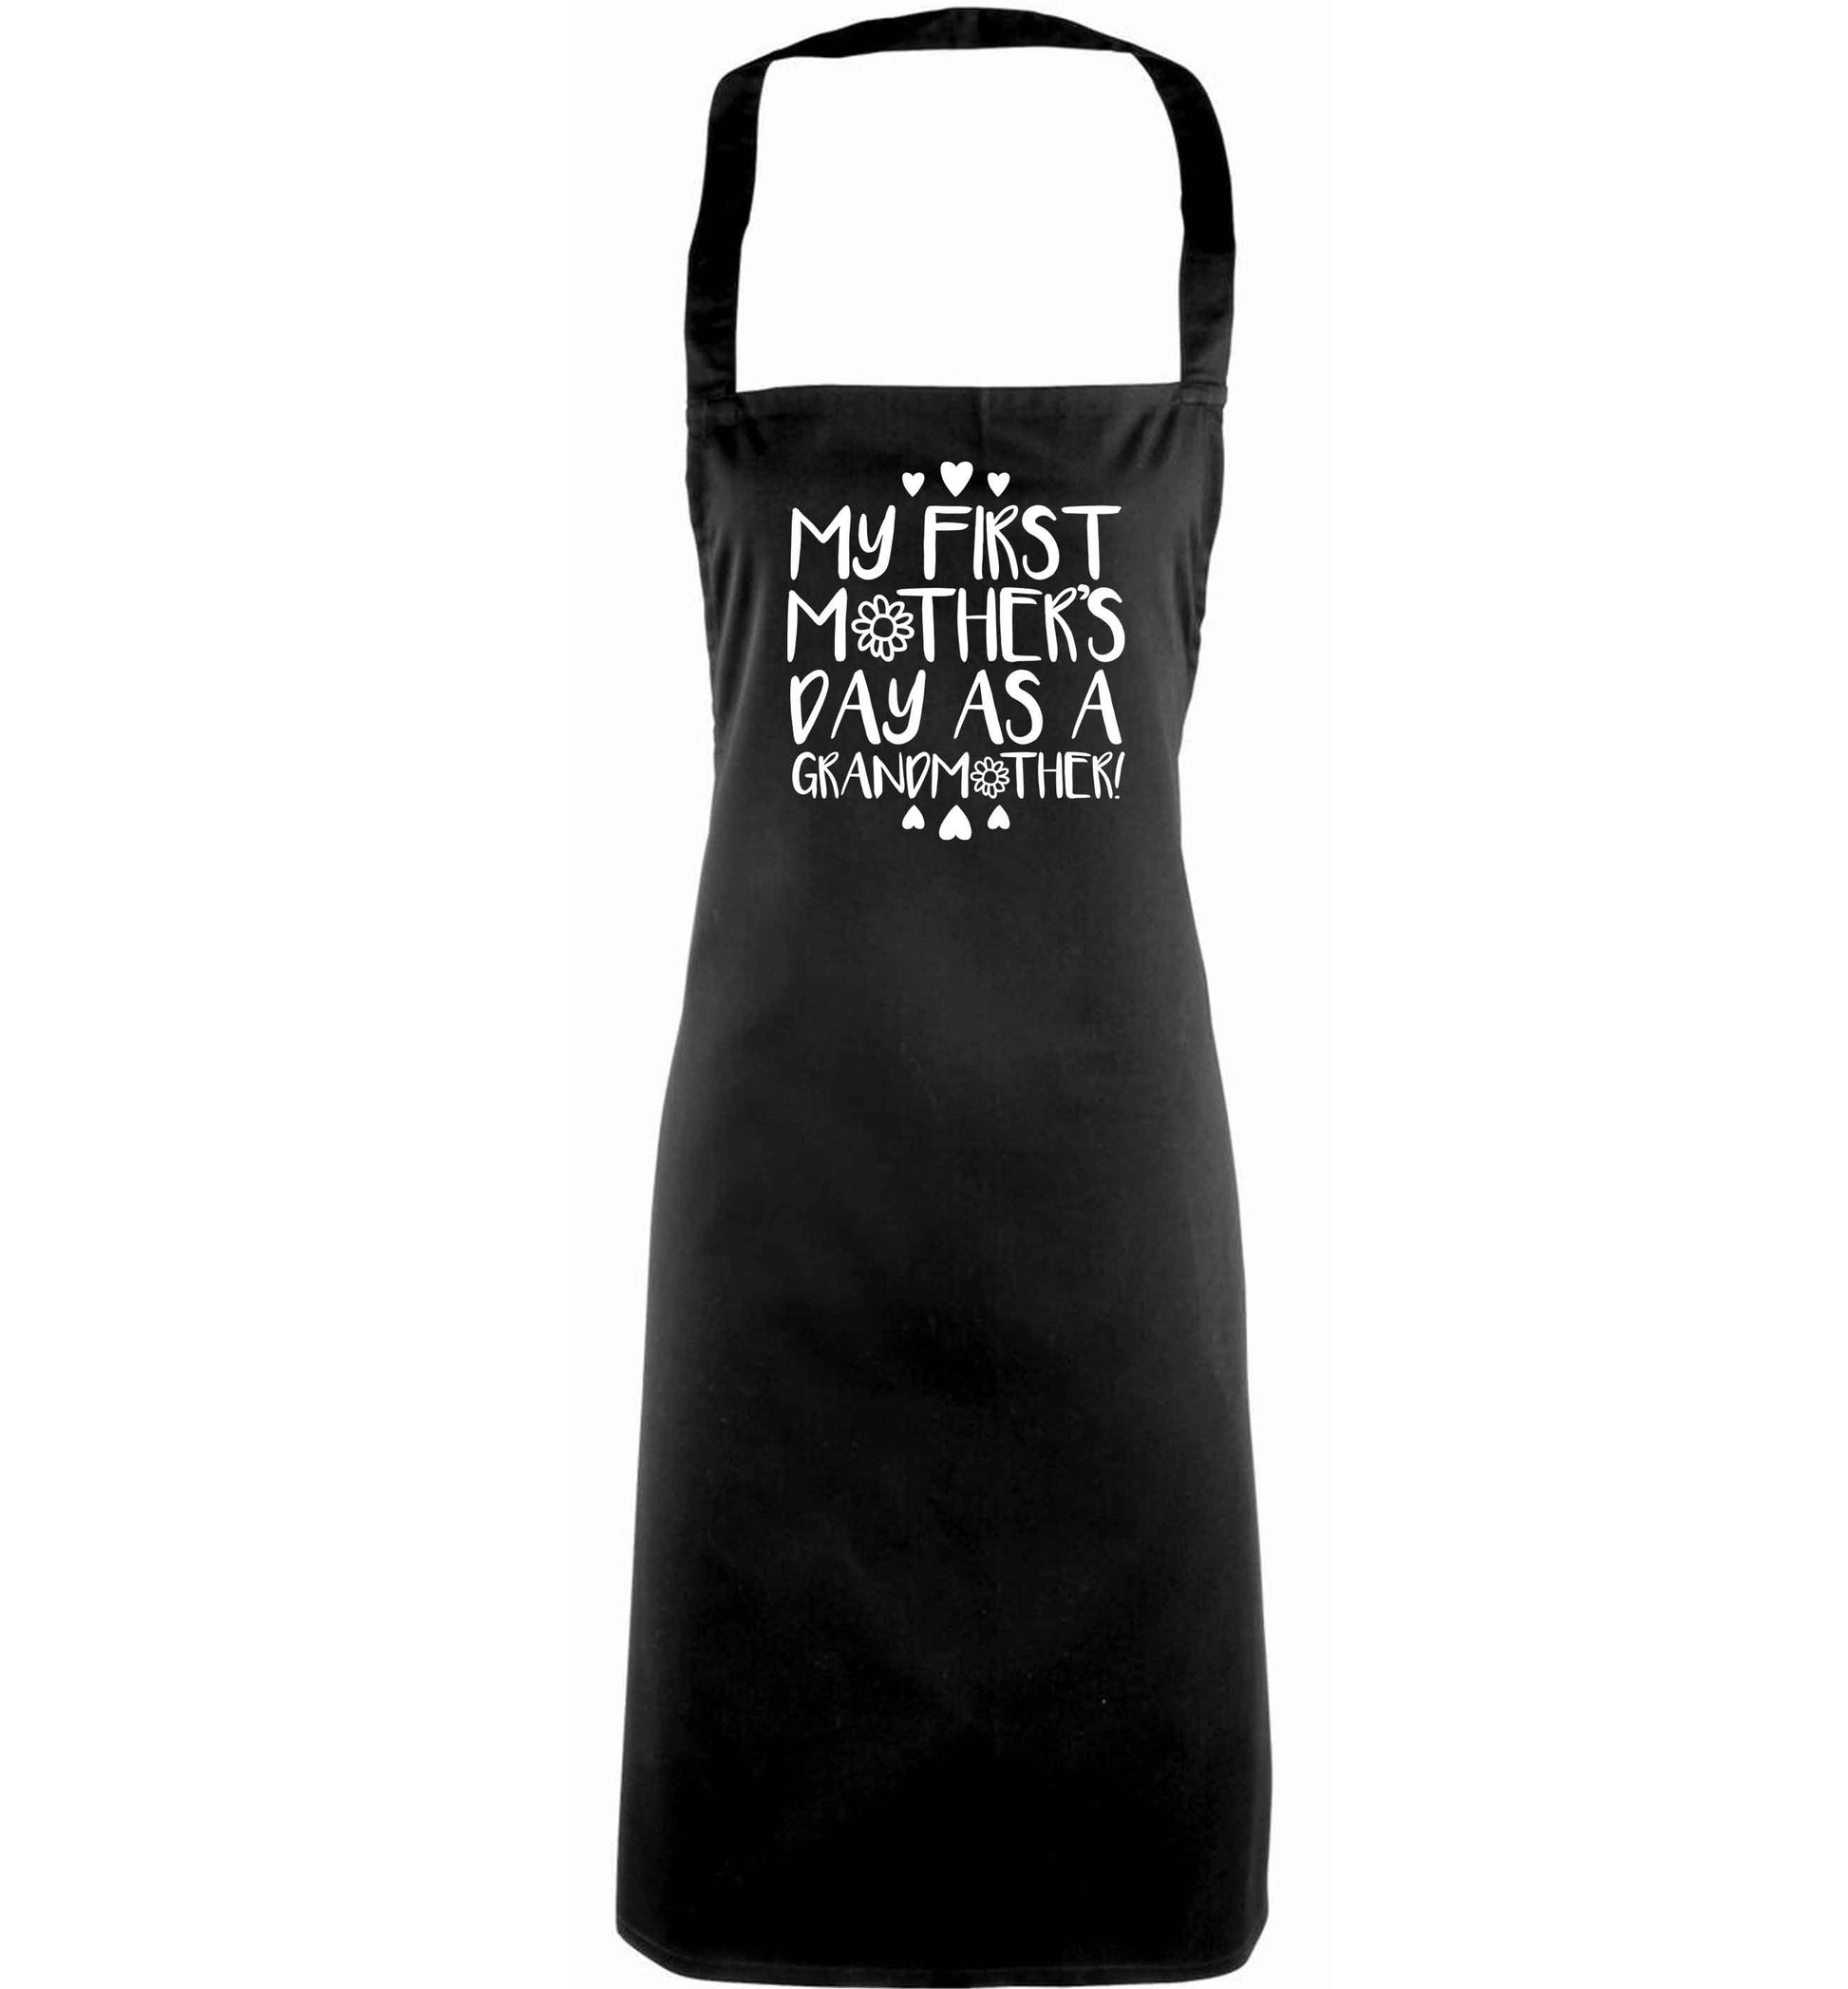 It's my first mother's day as a grandmother adults black apron